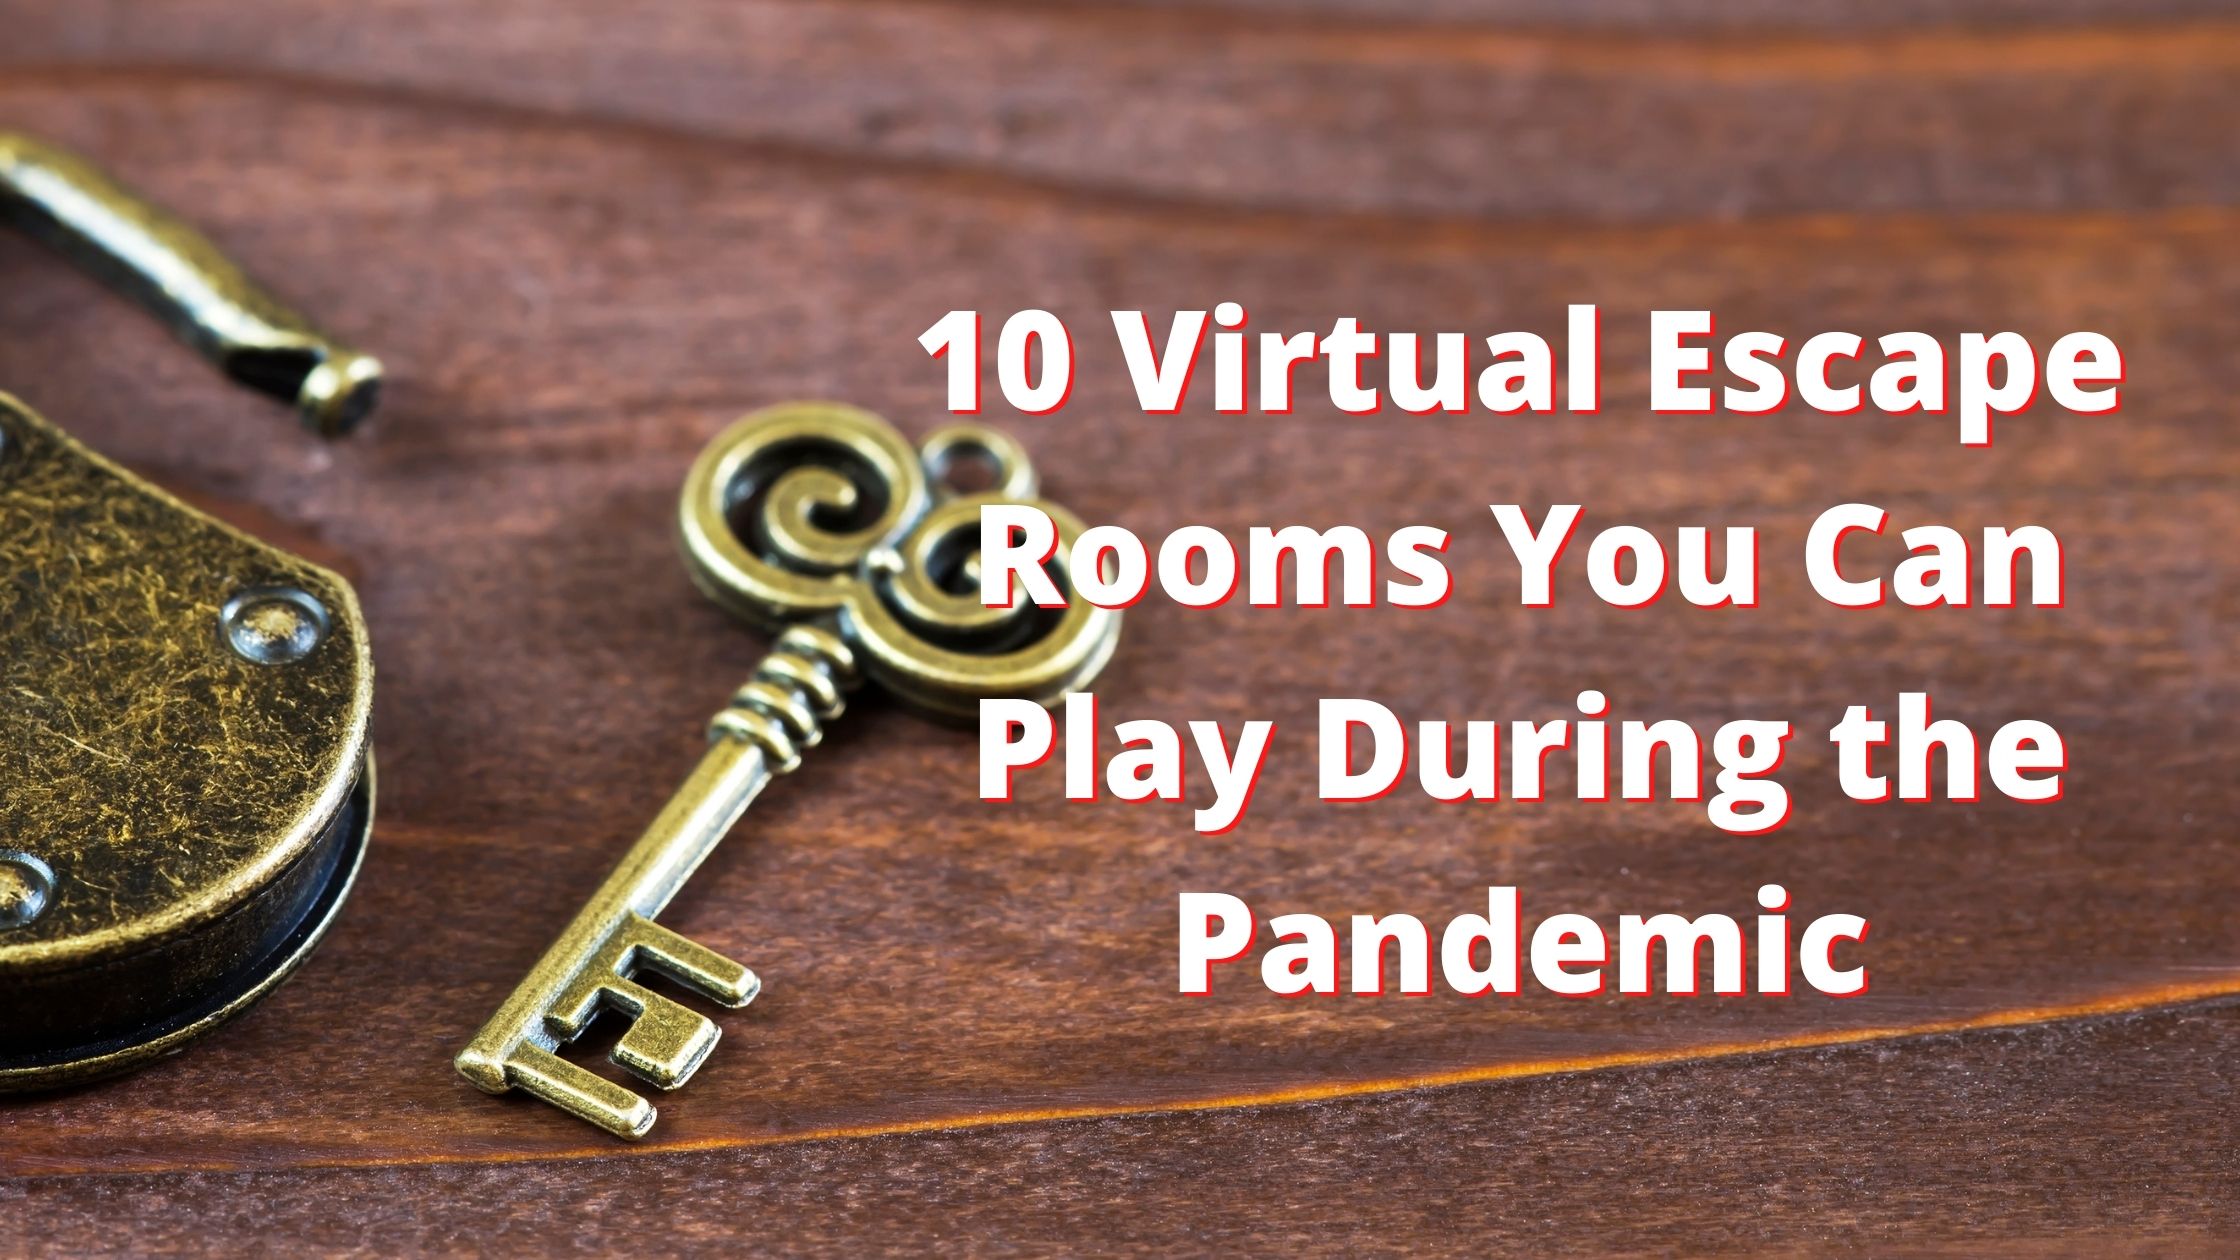 10 Virtual Escape Rooms to Play During the Pandemic